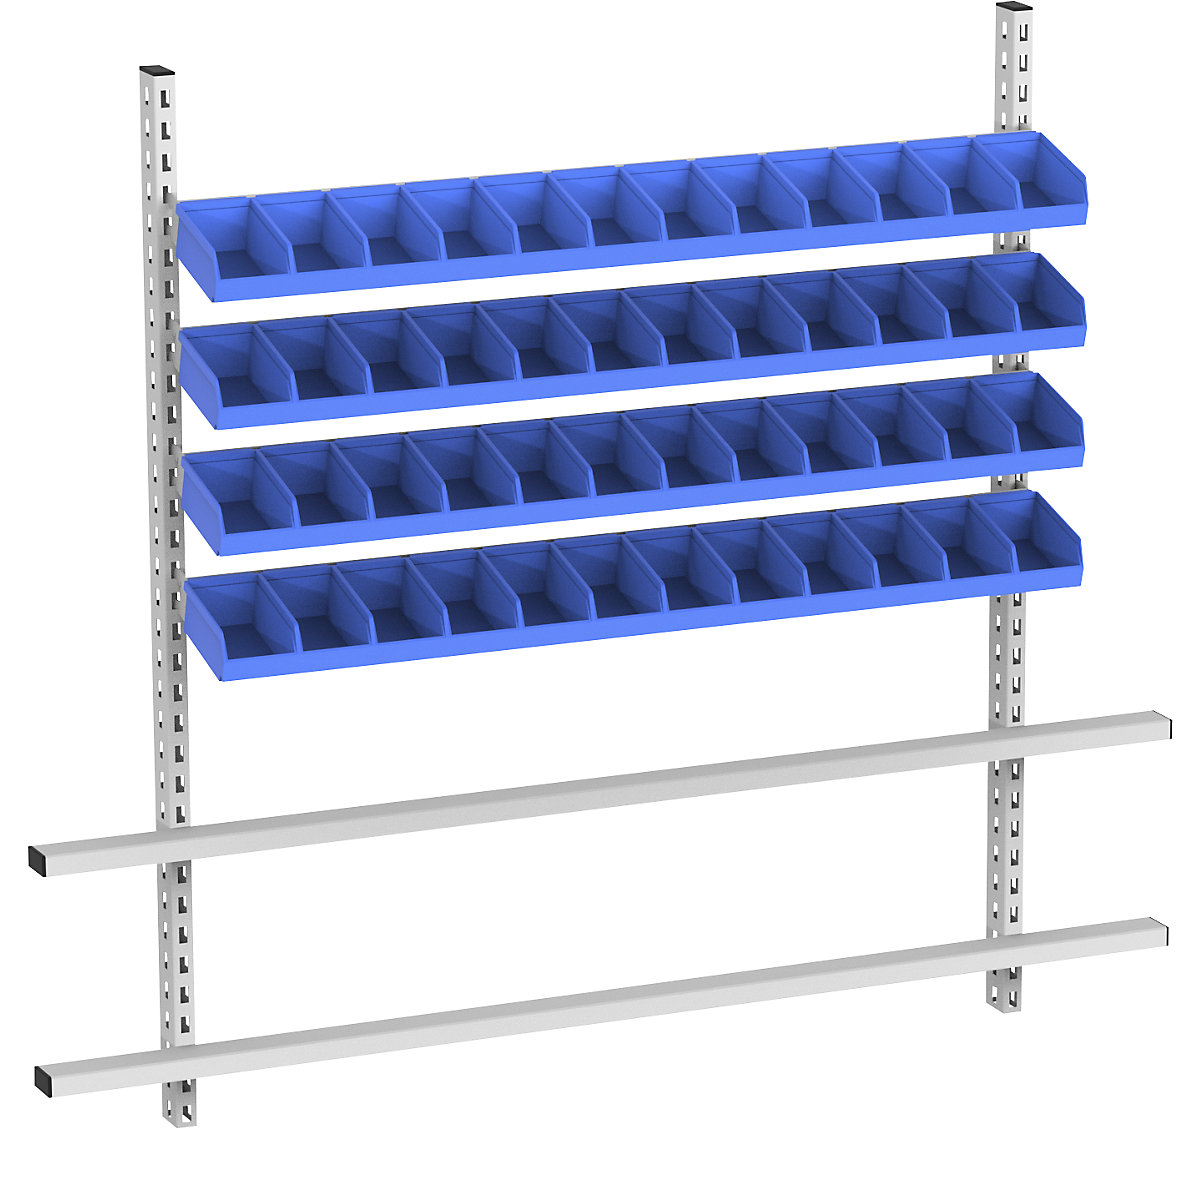 Add-on for table with open fronted storage bins